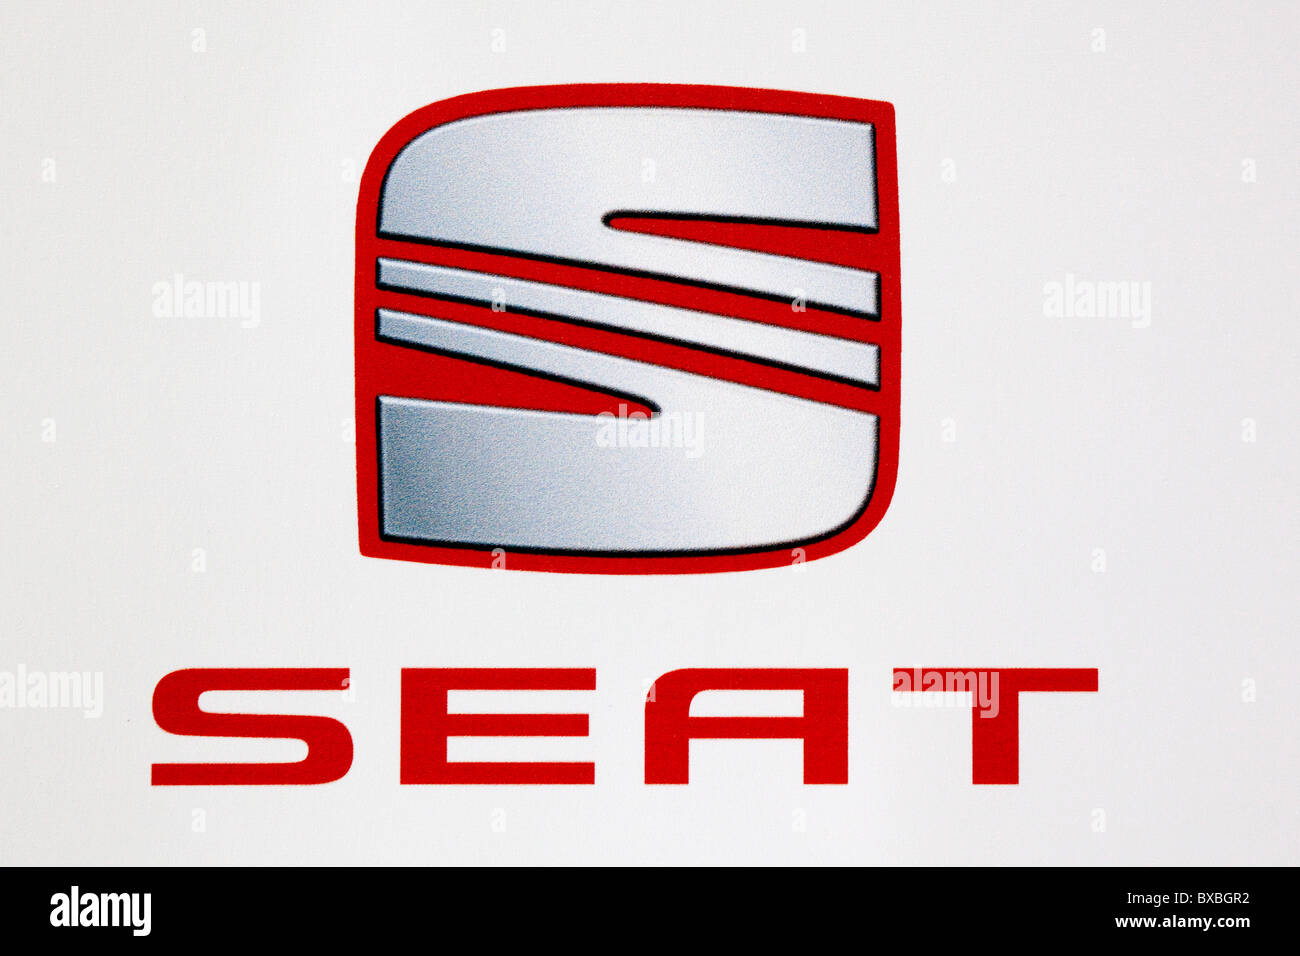 Logo of the Seat car brand Stock Photo